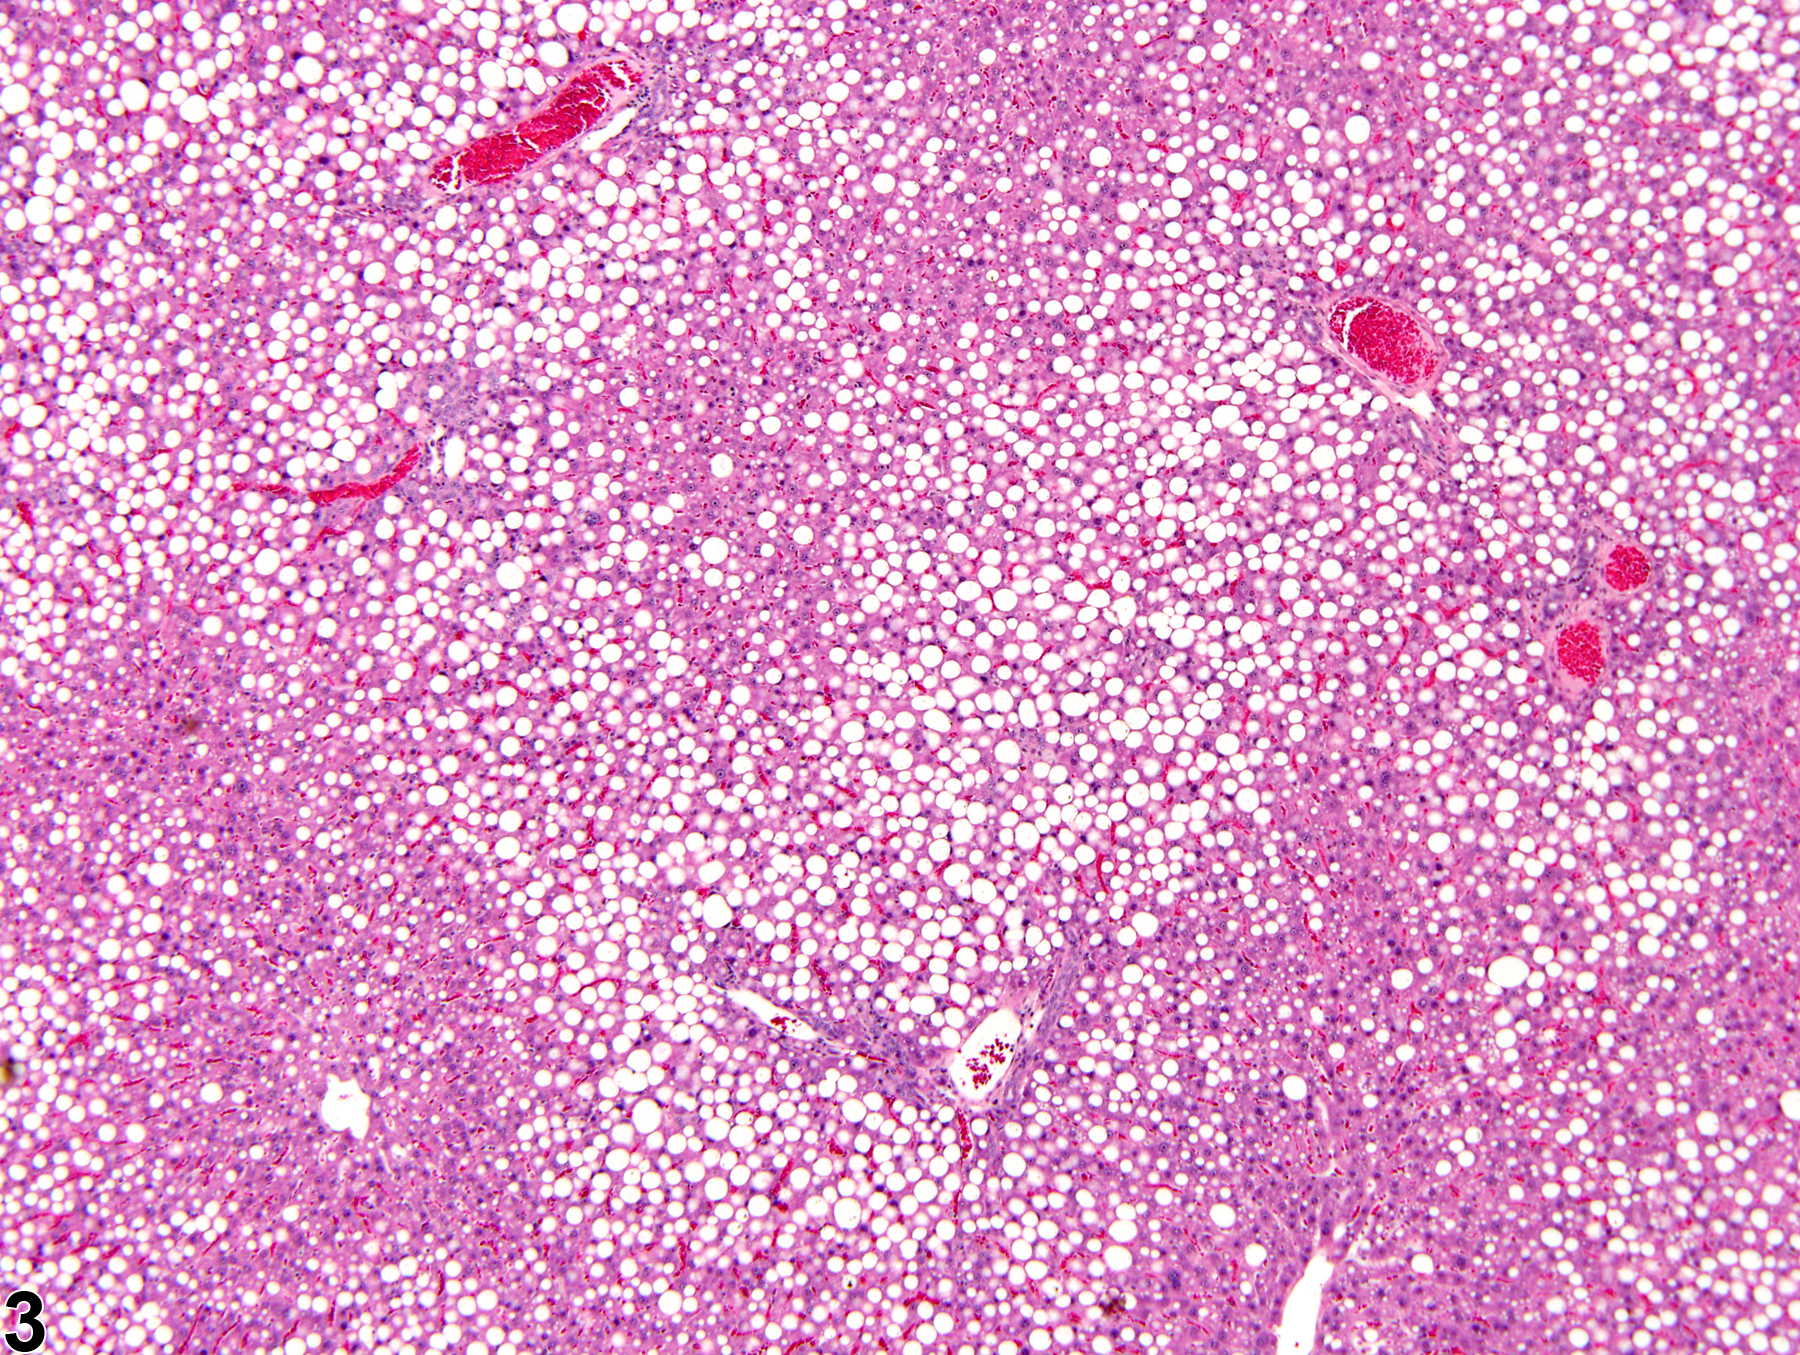 Image of fatty change in the liver from a male  F344/N rat in a chronic study